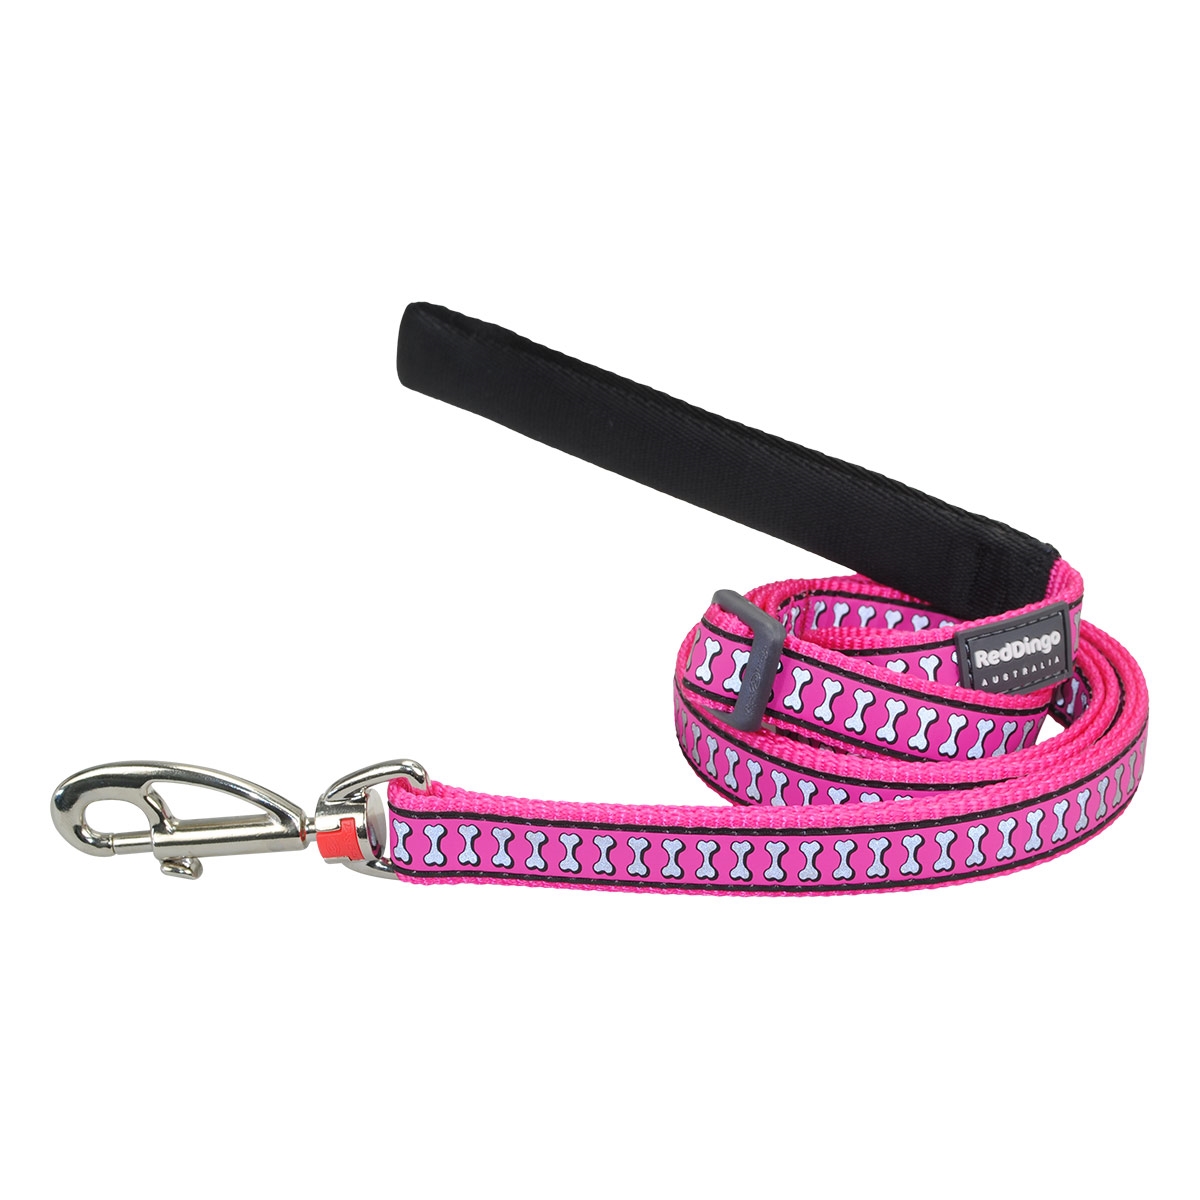 Picture of Red Dingo L6-RB-HP-15 Dog Lead Reflective Bone Hot Pink - Small 6ft